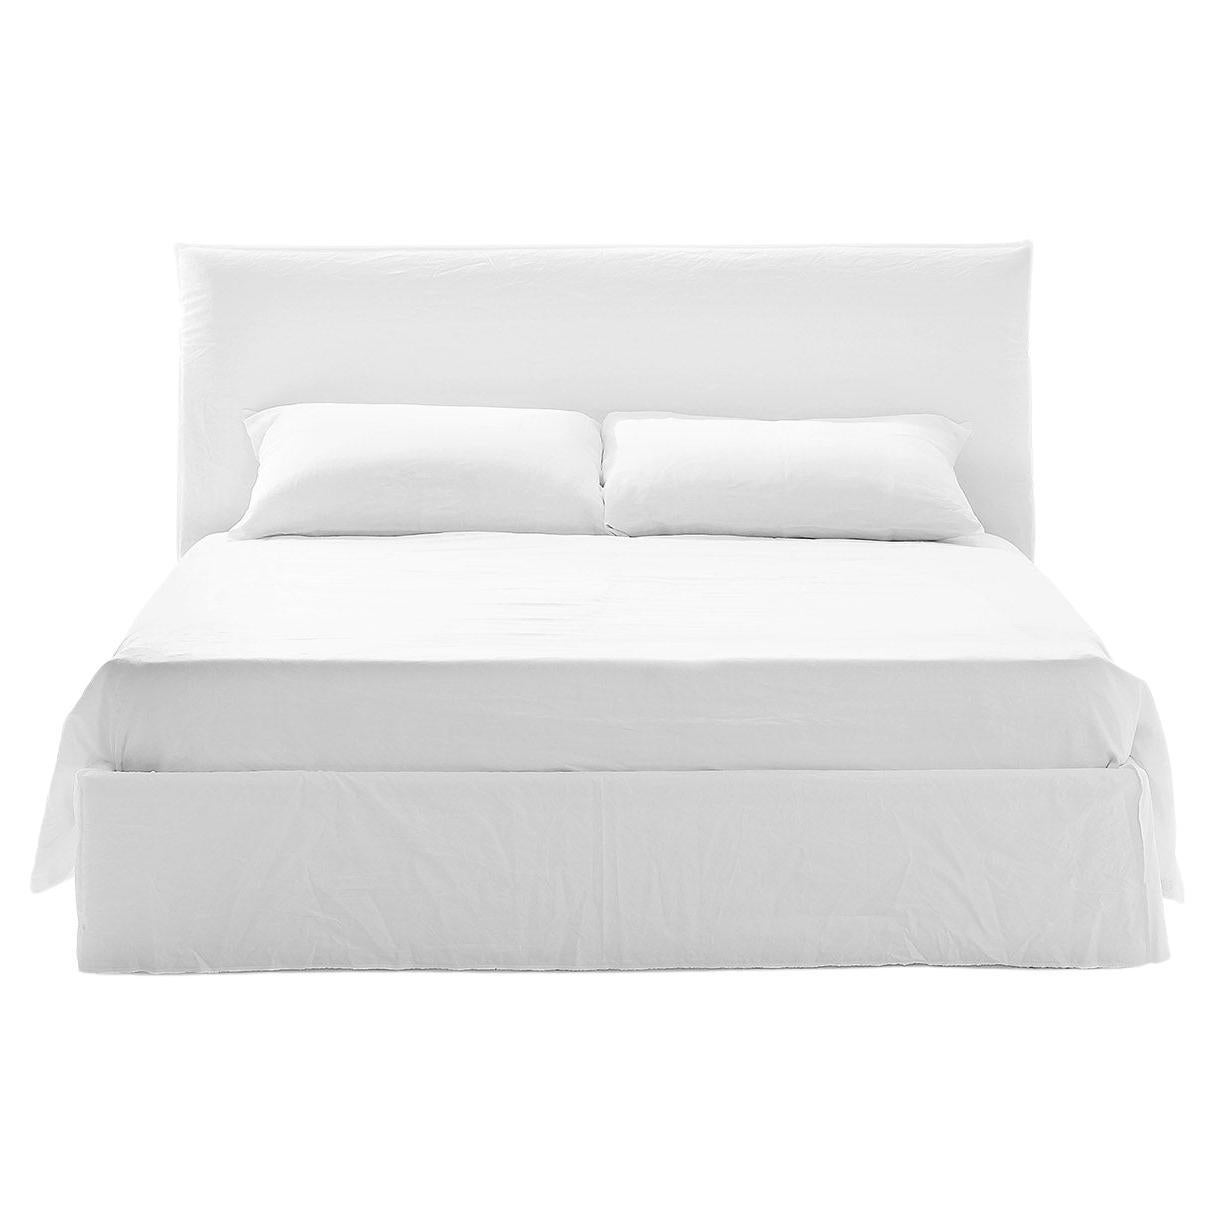 Gervasoni Ghost 80 King Knock Down Bed in White Linen Upholstery by Paola Navone For Sale